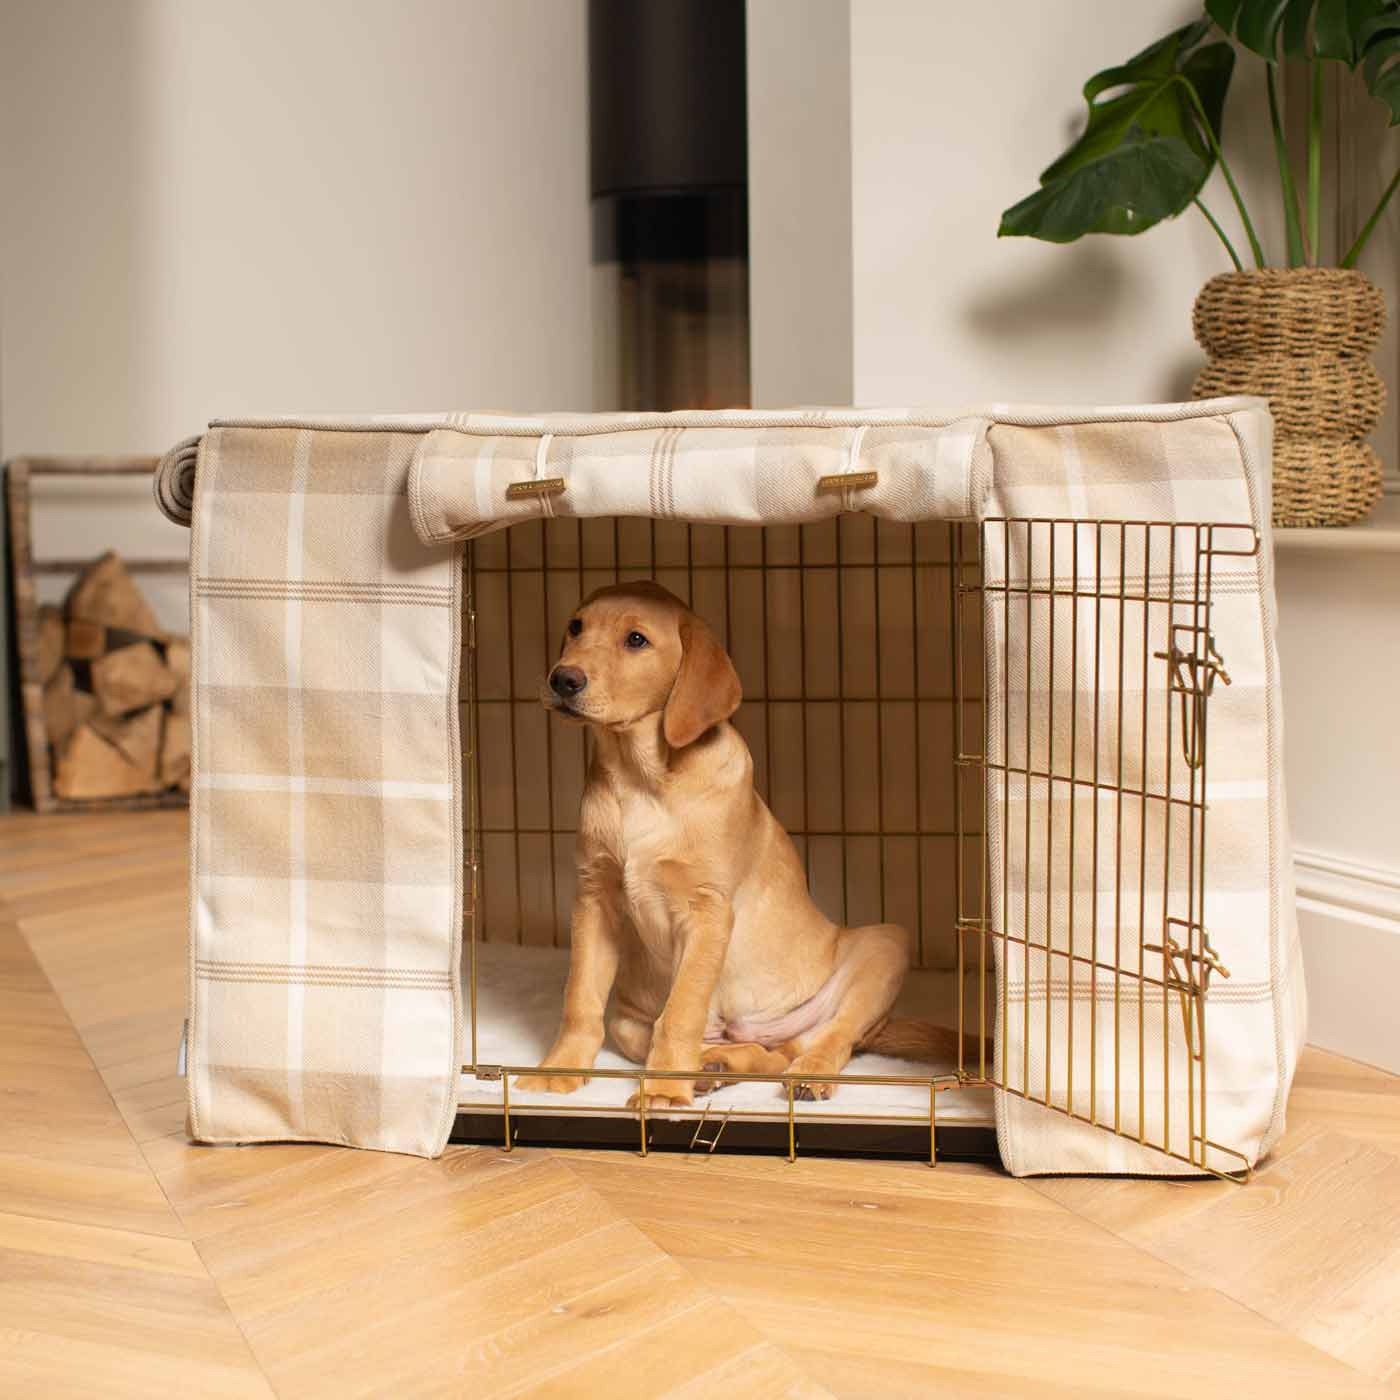 Discover Our Deluxe Heavy Duty Dog Crate With Balmoral Natural Tweed Crate Cover The Perfect Crate Accessory For The Ultimate Pet Den. Available To Personalise Here at Lords & Labradors 